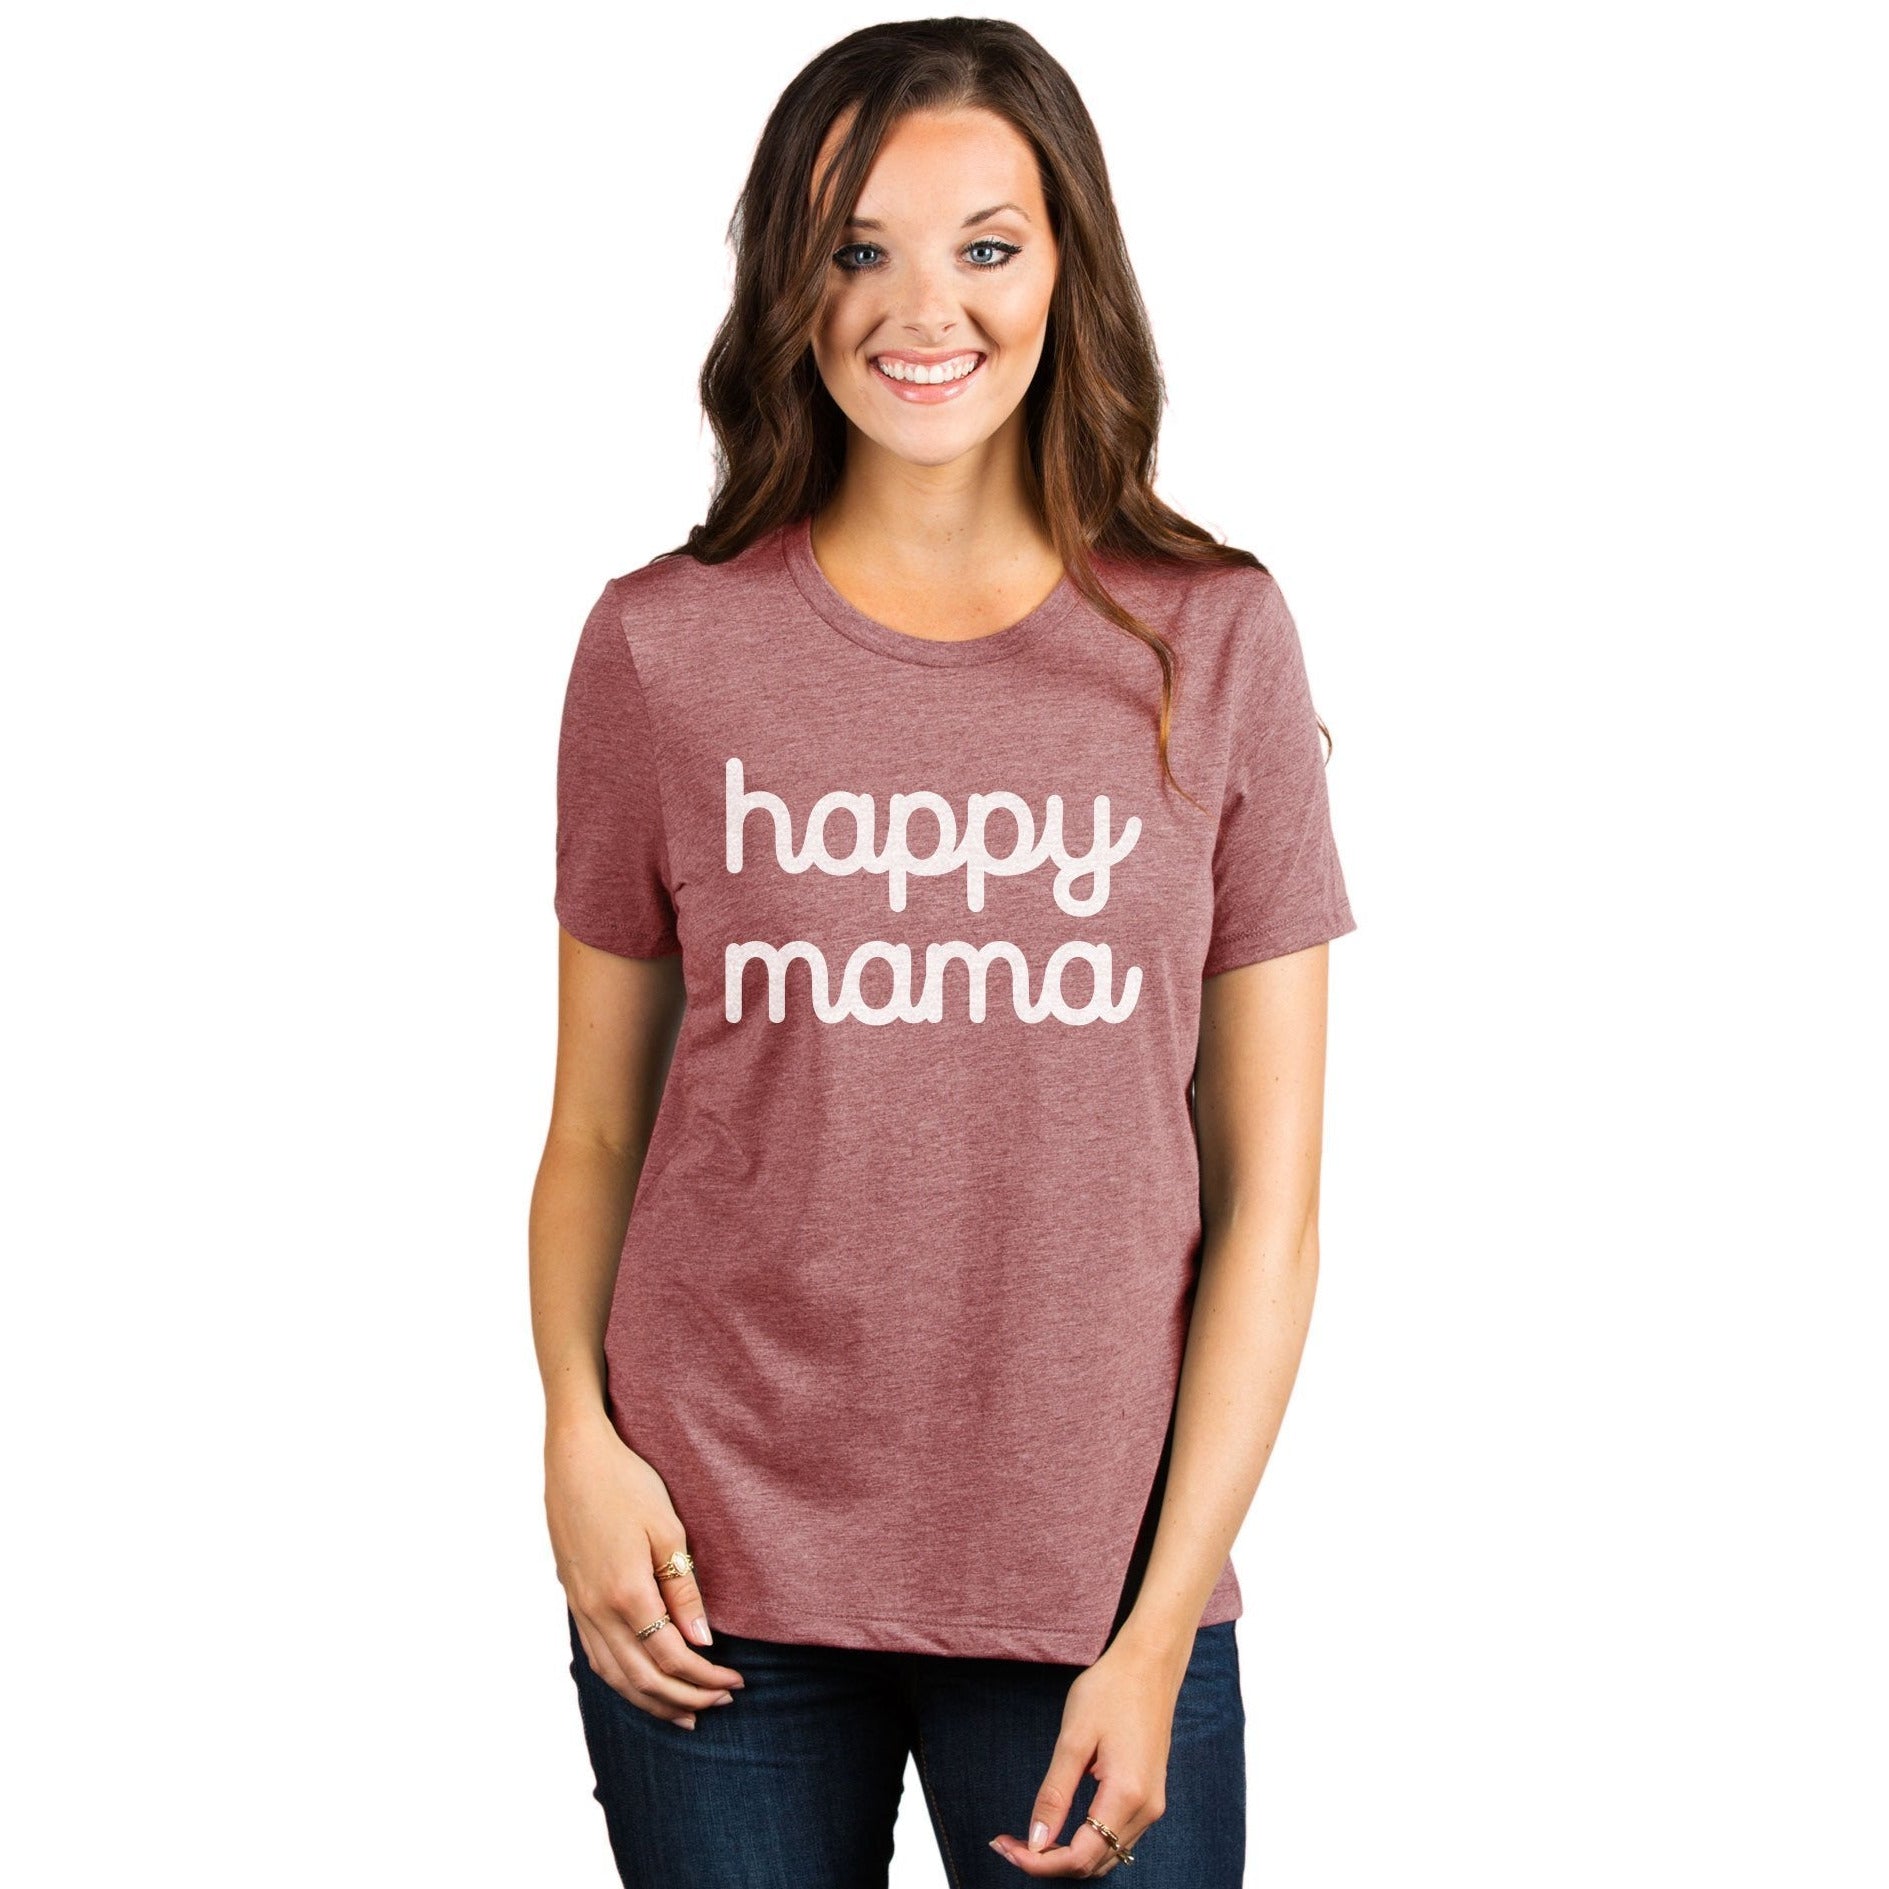 Happy Mama Women's Relaxed Crewneck T-Shirt Top Tee Heather Rouge Model
